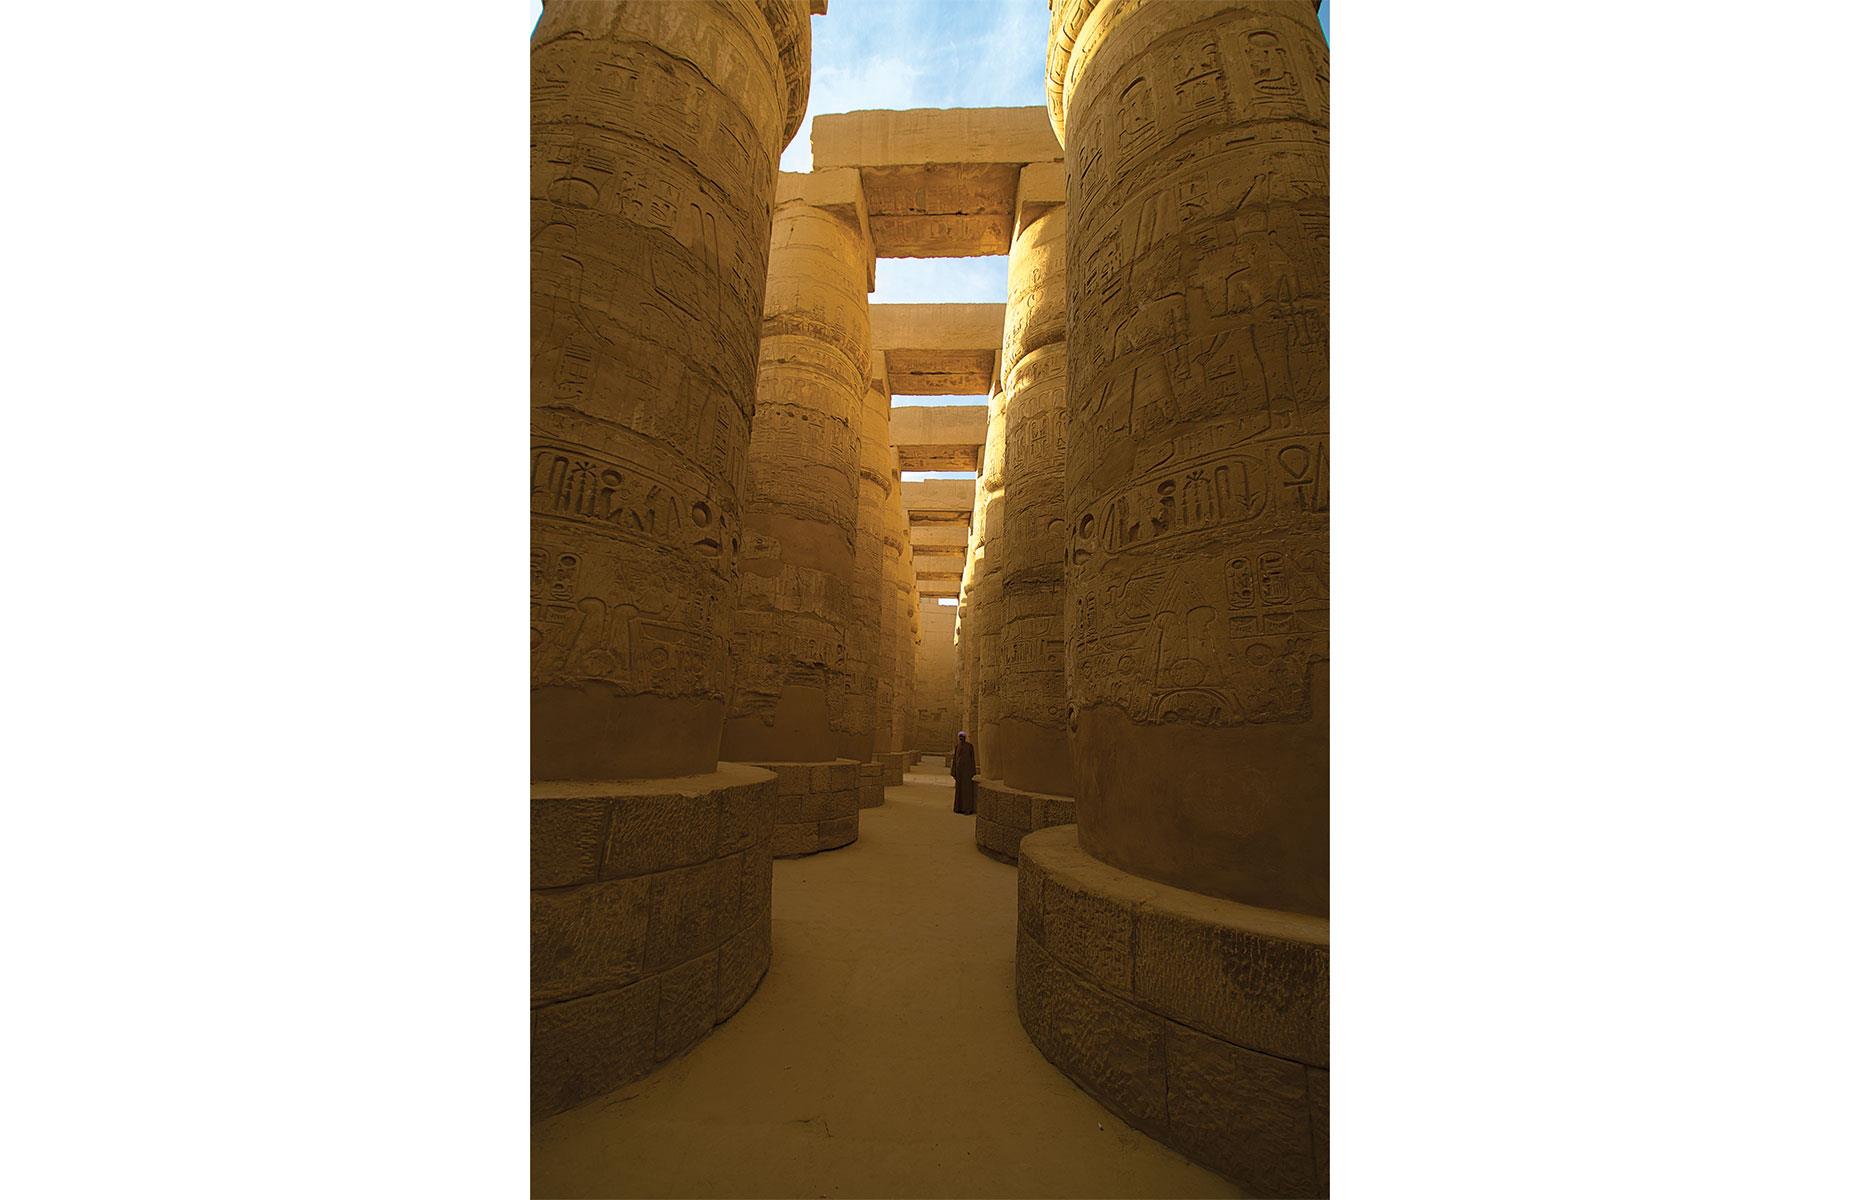 Slide 7 of 14: Nearby is the Karnak Temple Complex, an archaeological site rich in treasures and home to one of the great masterpieces of ancient Egyptian architecture. The Great Hypostyle Hall, a jaw-dropping site filled with intricately carved columns, was the vision of Seti I (1294–1279 BC), another New Kingdom pharaoh. The pillared hall is testament to Seti I’s interest in art, since he was "a rare combination of military leader and connoisseur of the arts". The hall – standing before the innermost shine complex of Amun-Re, god of the sun – was intended to represent the primeval swamp land that emerged at the creation.